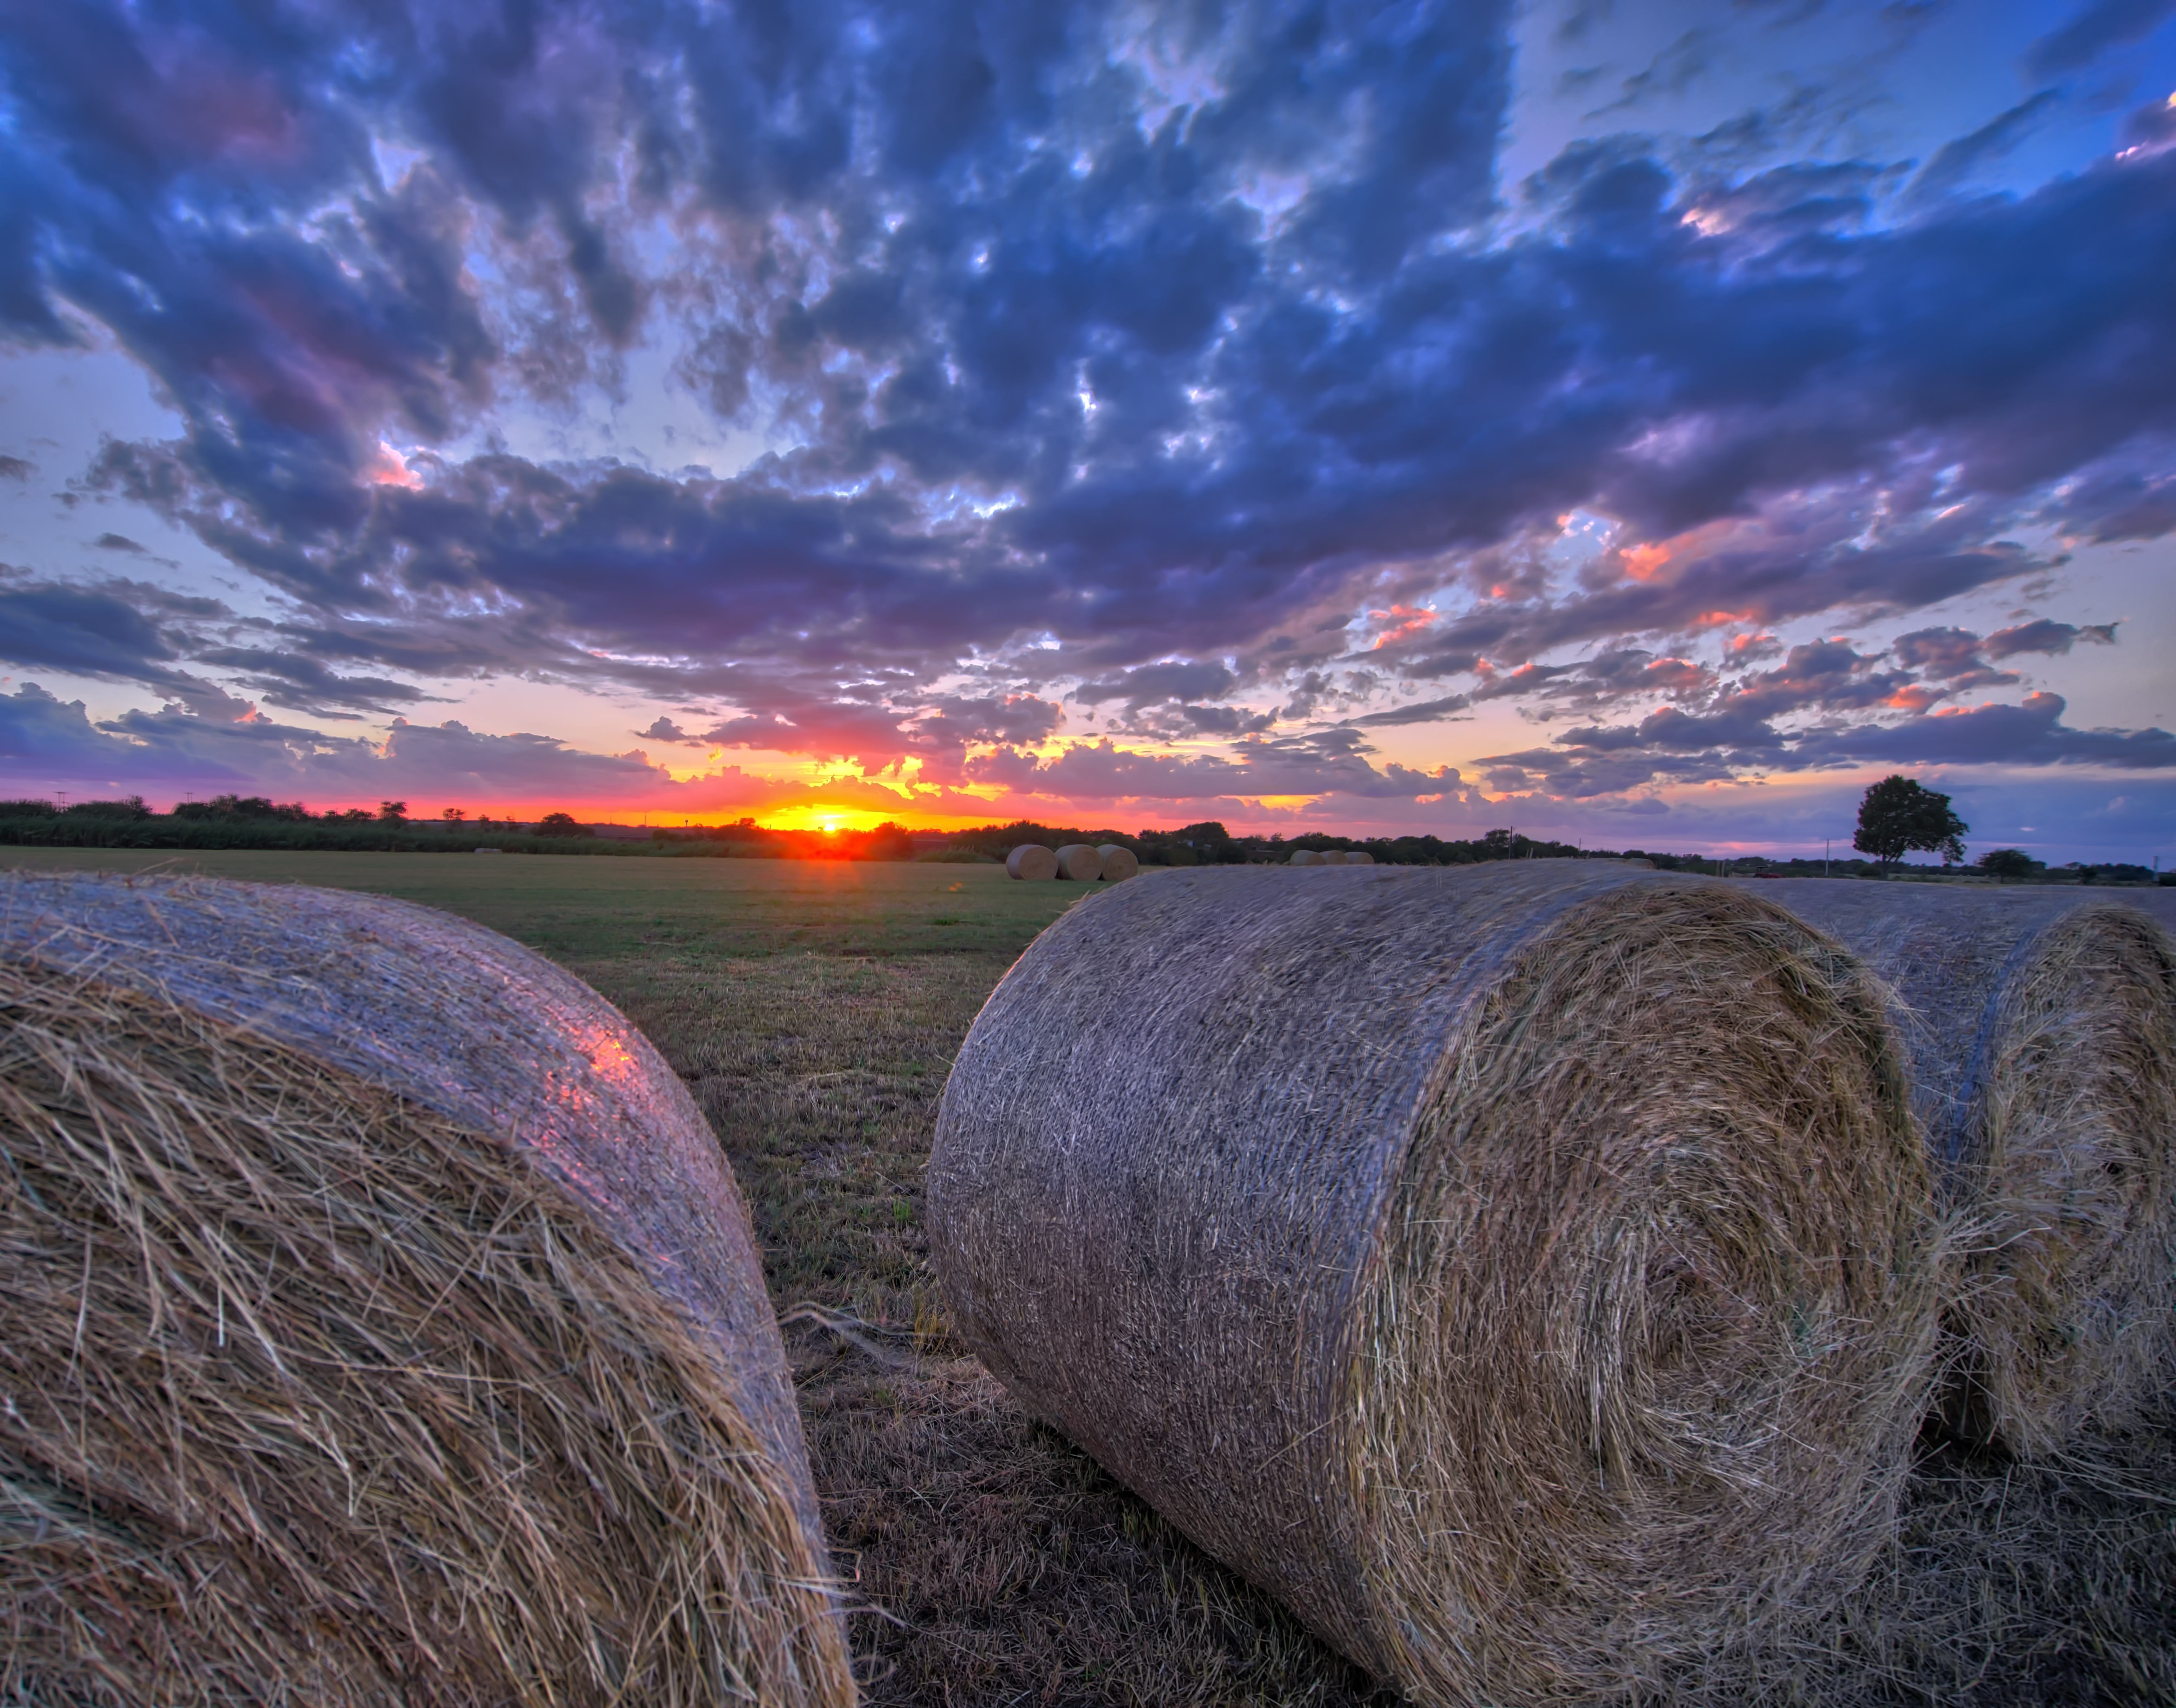 Hay Bales at Sunset, A7r, Bales, Central, Clouds, HQ Photo